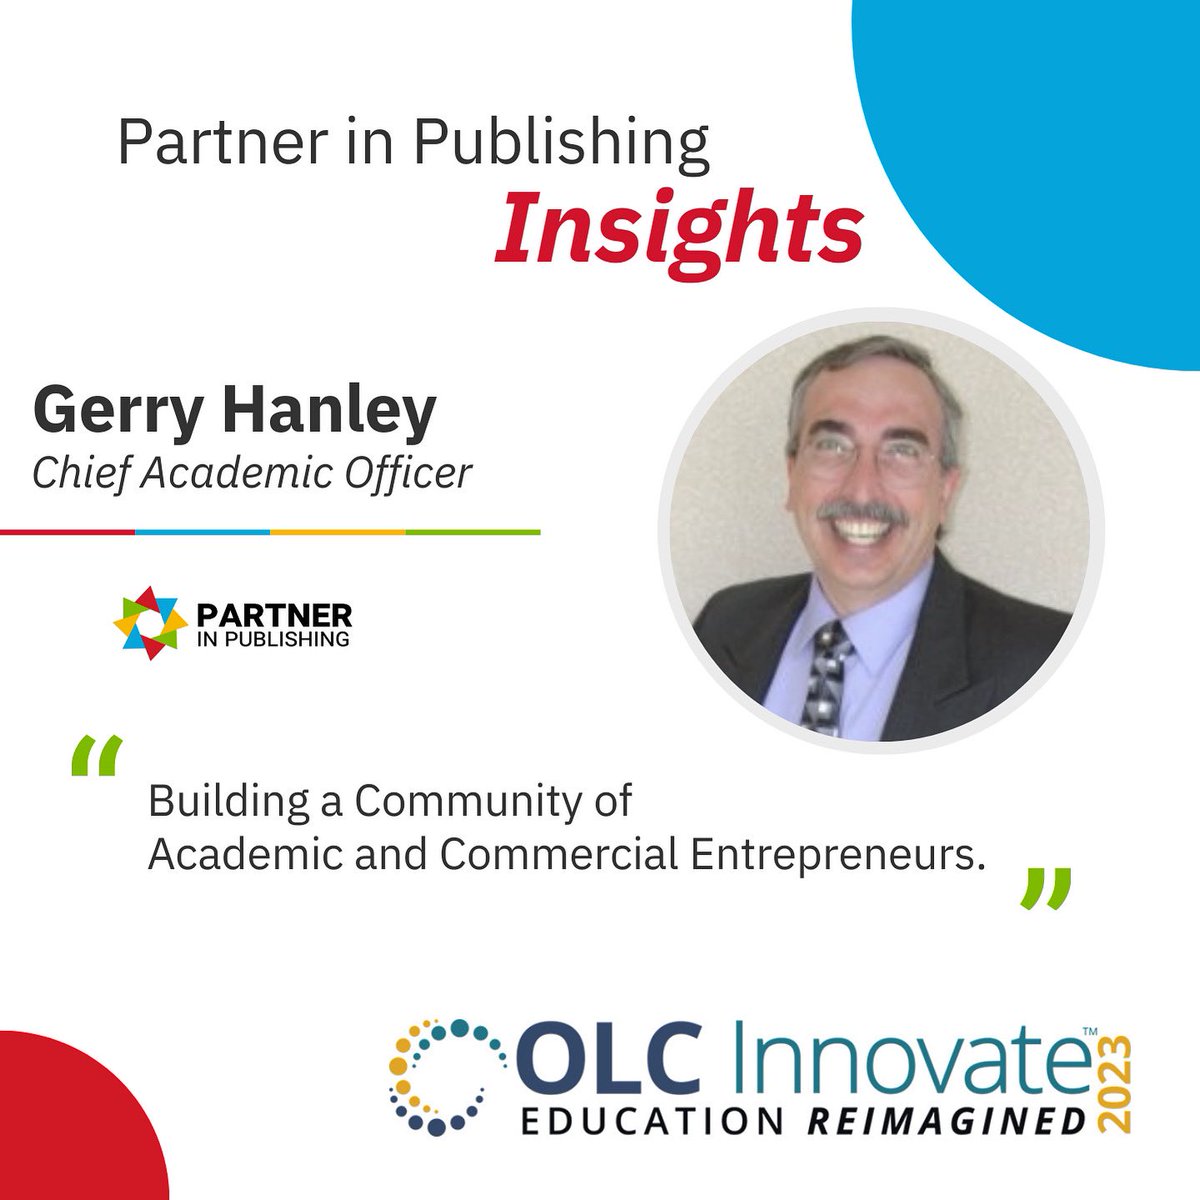 Come talk to our Chief Academic Officer Gerry Hanley and former Assistant Vice Chancellor of Academic Technologies. He’s presenting on Building a Community of Academic and Commercial Entrepreneurs.

@OLCToday #OLCInnovate #Innovate2023